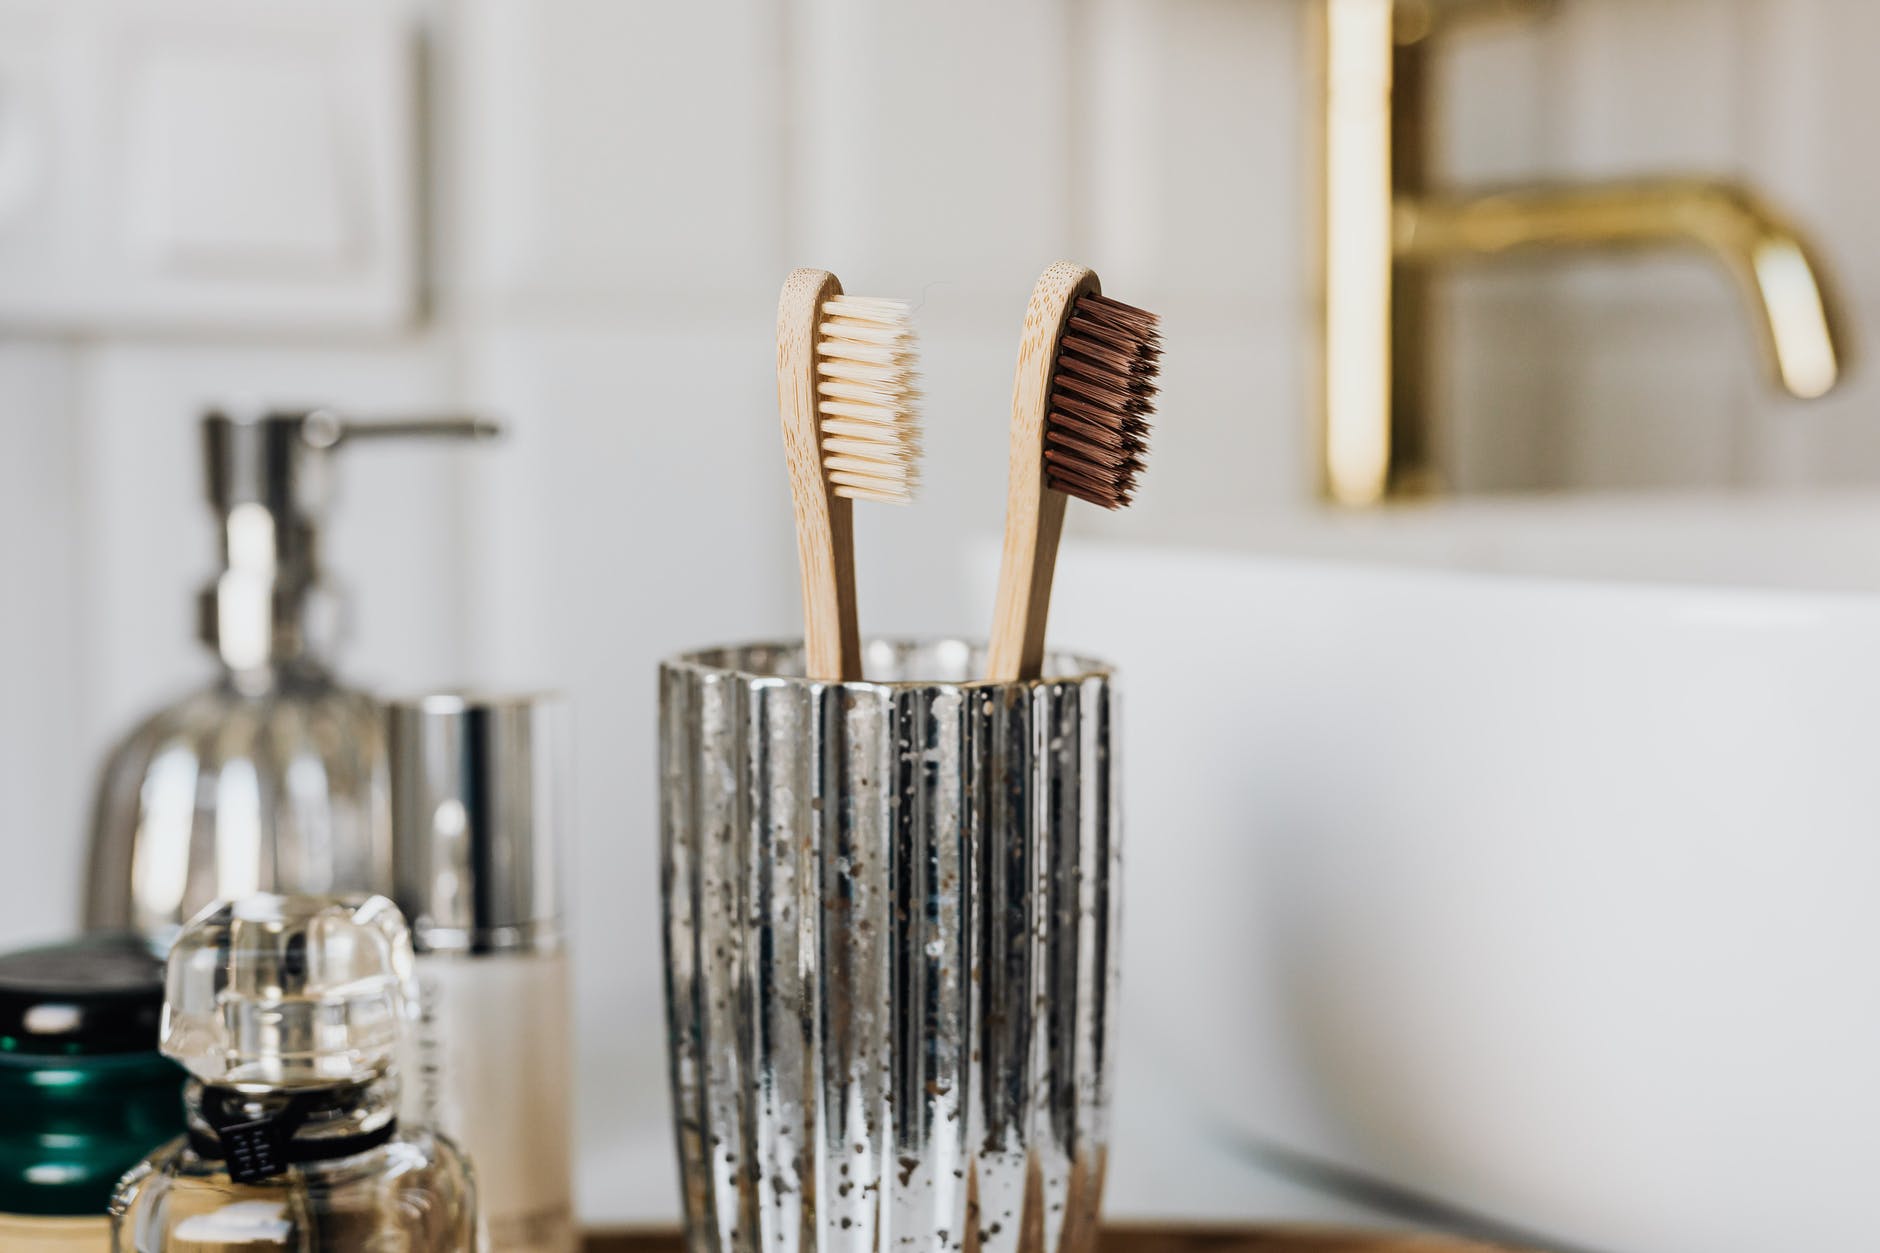 bamboo toothbrushes in glass in stylish bathroom